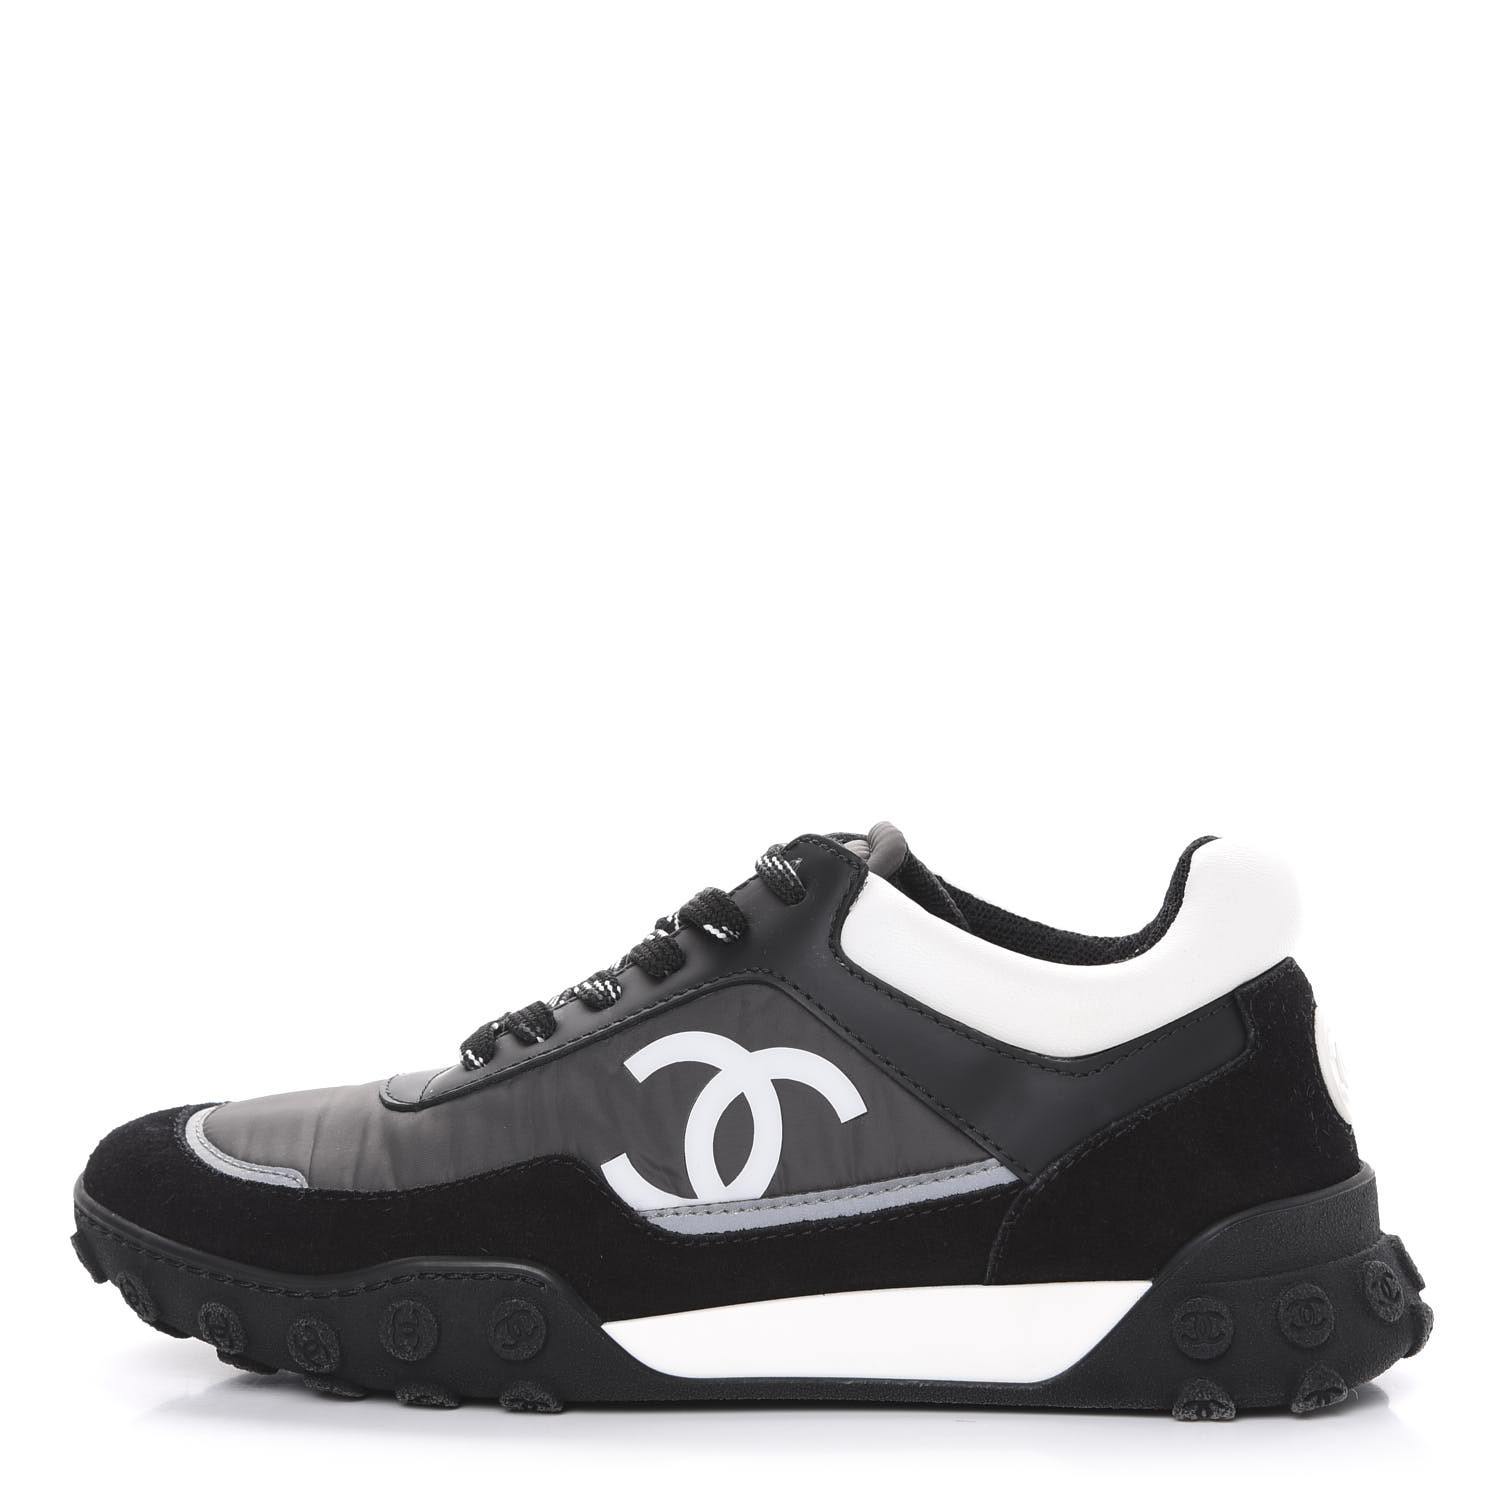 chanel nylon and calfskin sneakers